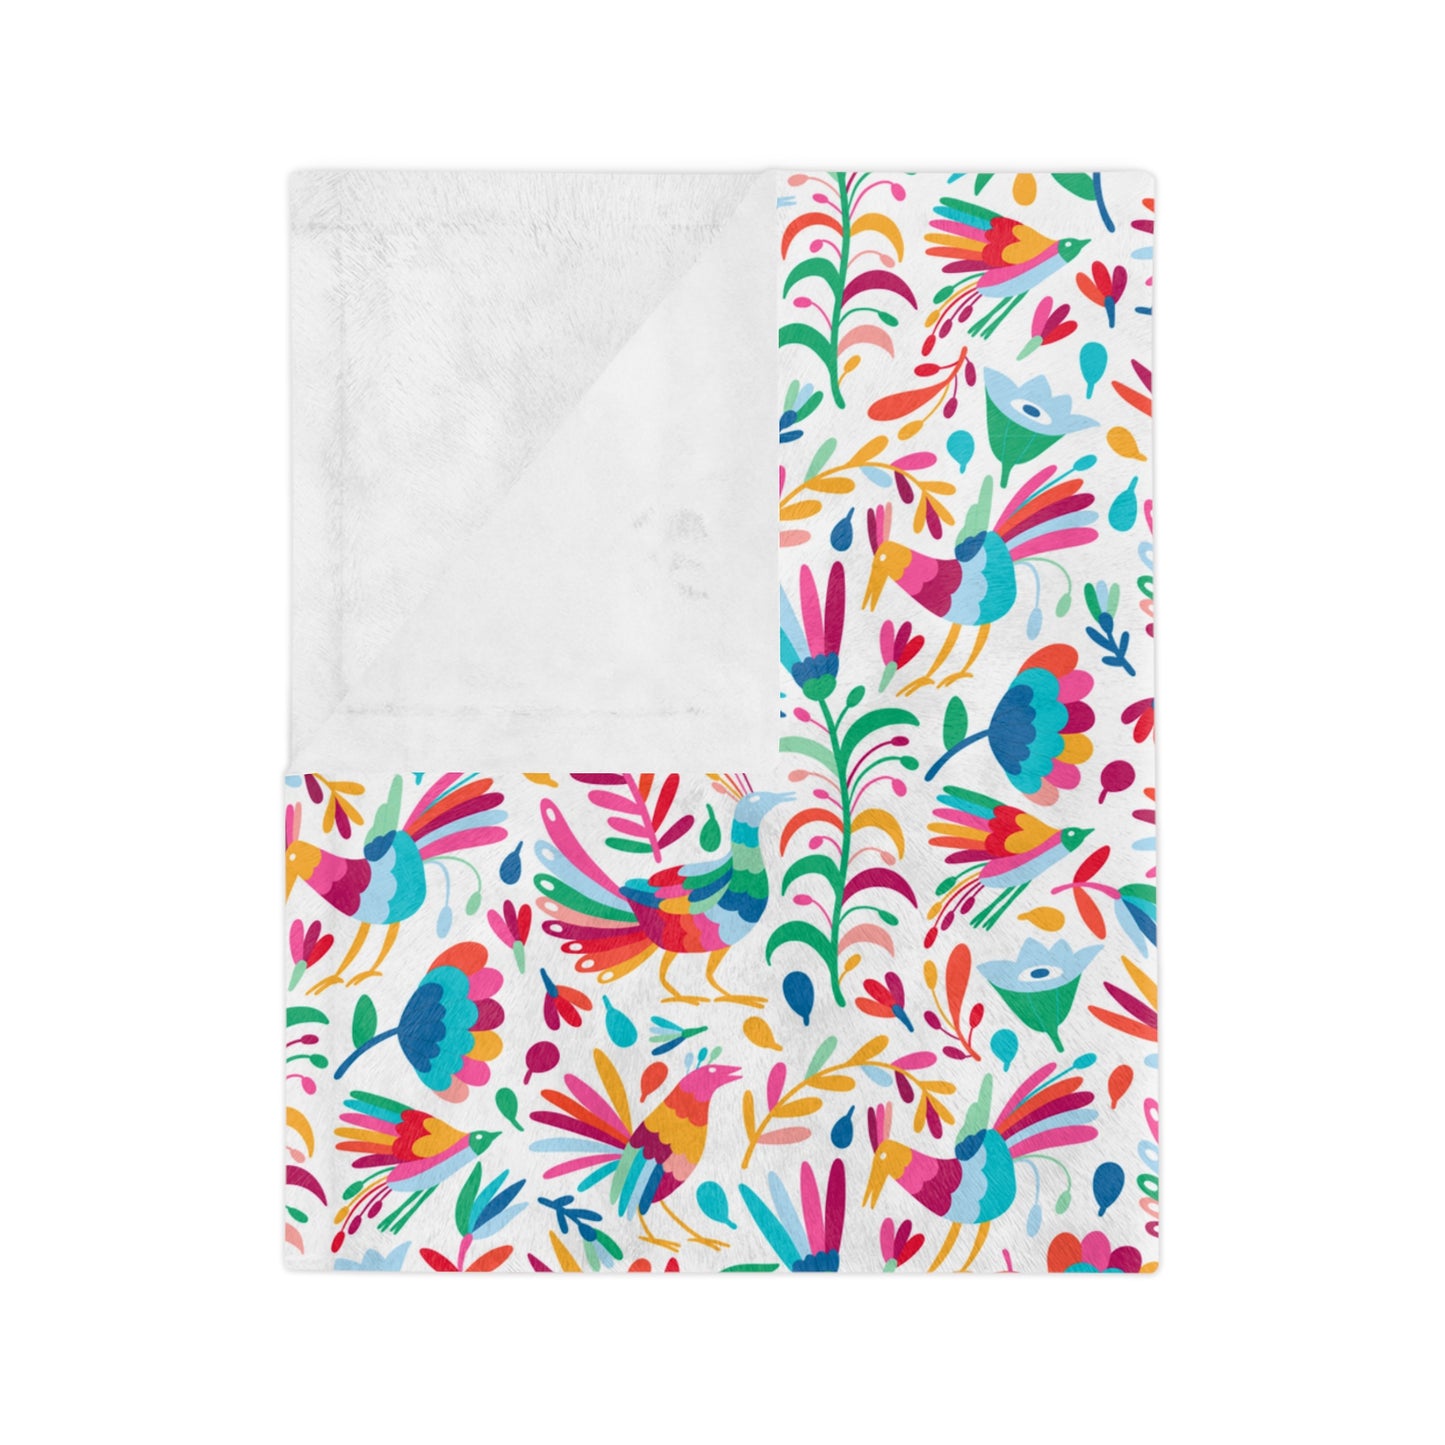 Otomi print  Blanket for Mexican home decor. Birthday gift for Mexican mom, Mexican friend or tia.